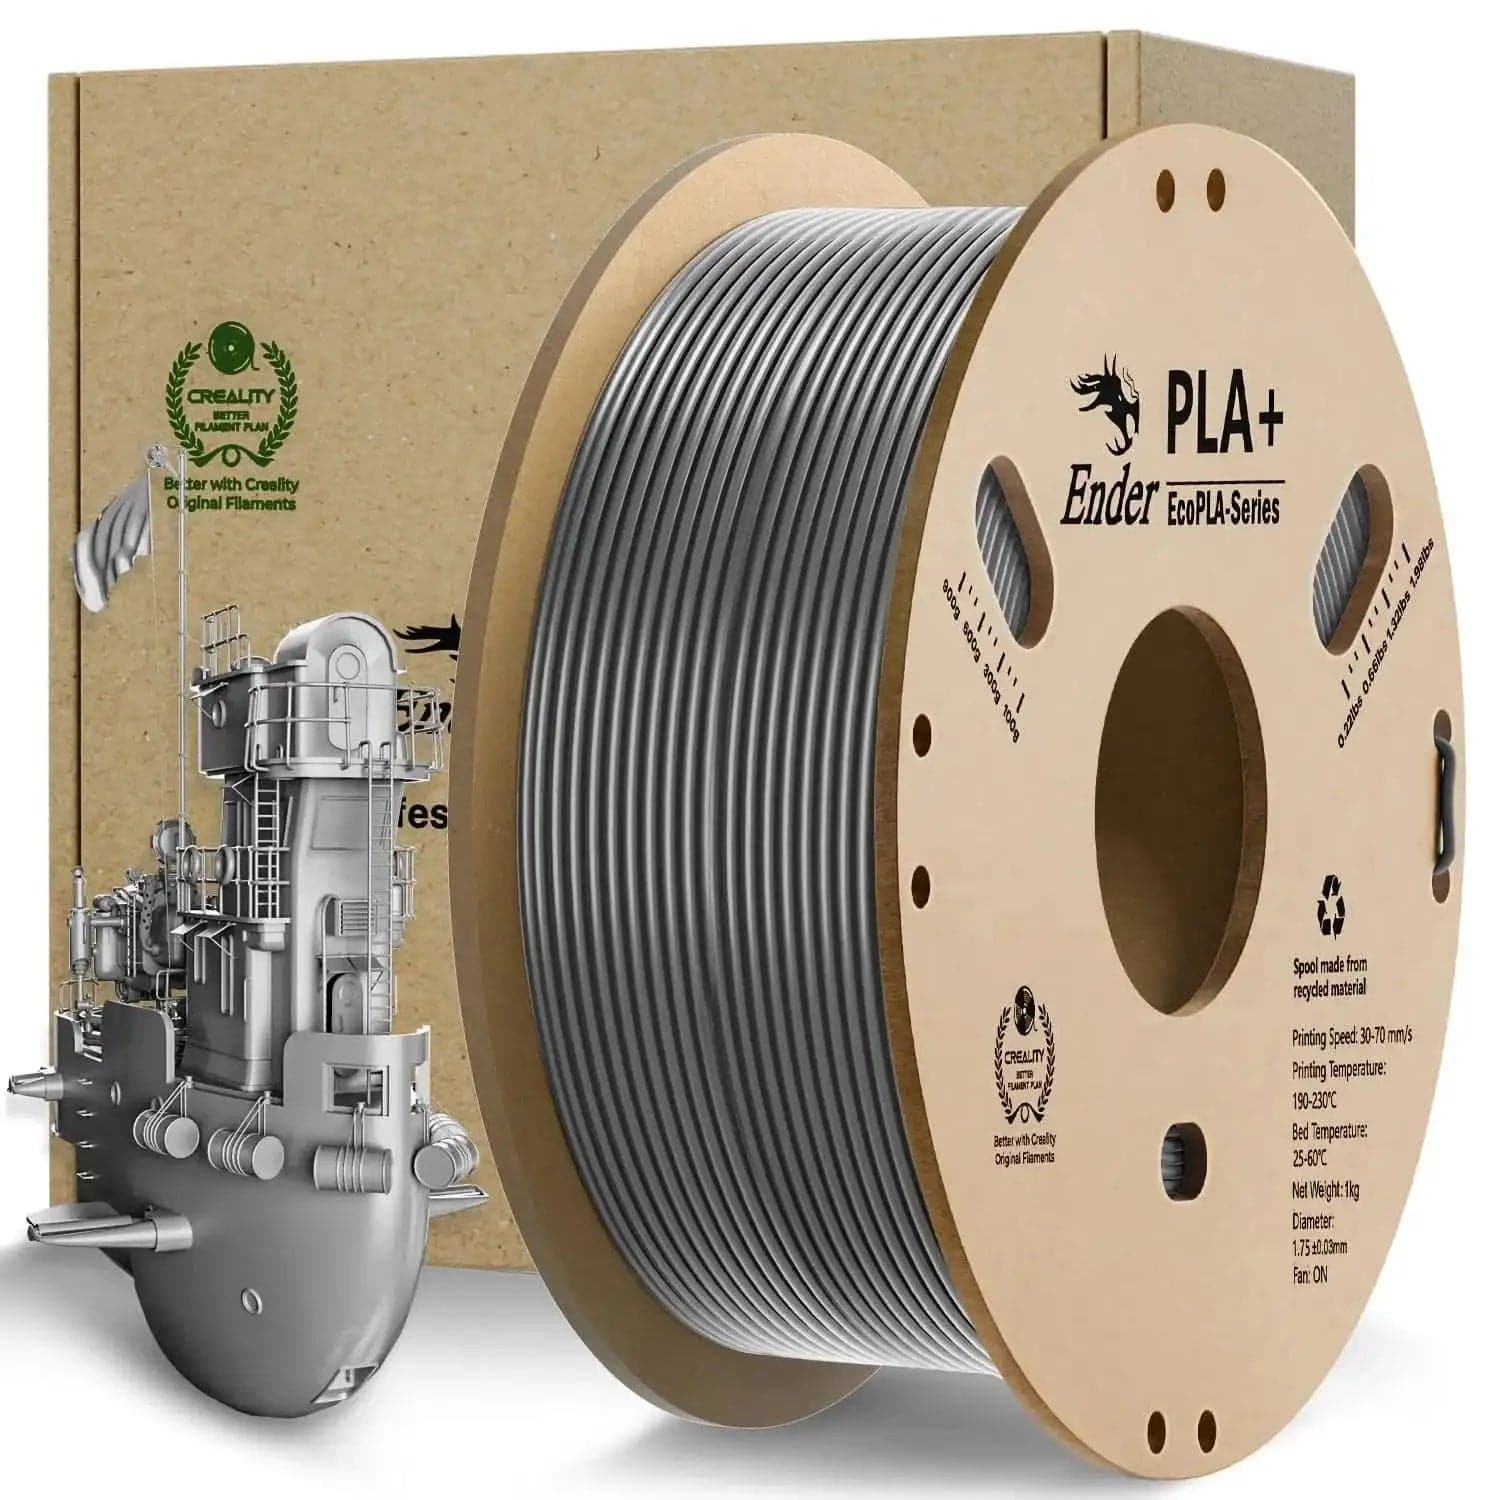 Over 10kg Filament Combo-Creality Ender PLA+ 1.75mm 1KG Filament
【Ship From Amazon FBA Warehouse】Same shipping service with Amazon. Enjoy reliable performance and fast shipping with the Amazon FBA Warehouse.
【Creality Quality Ass10kg Filament Combo-Creality Ender PLA+ 13D Printing Materials